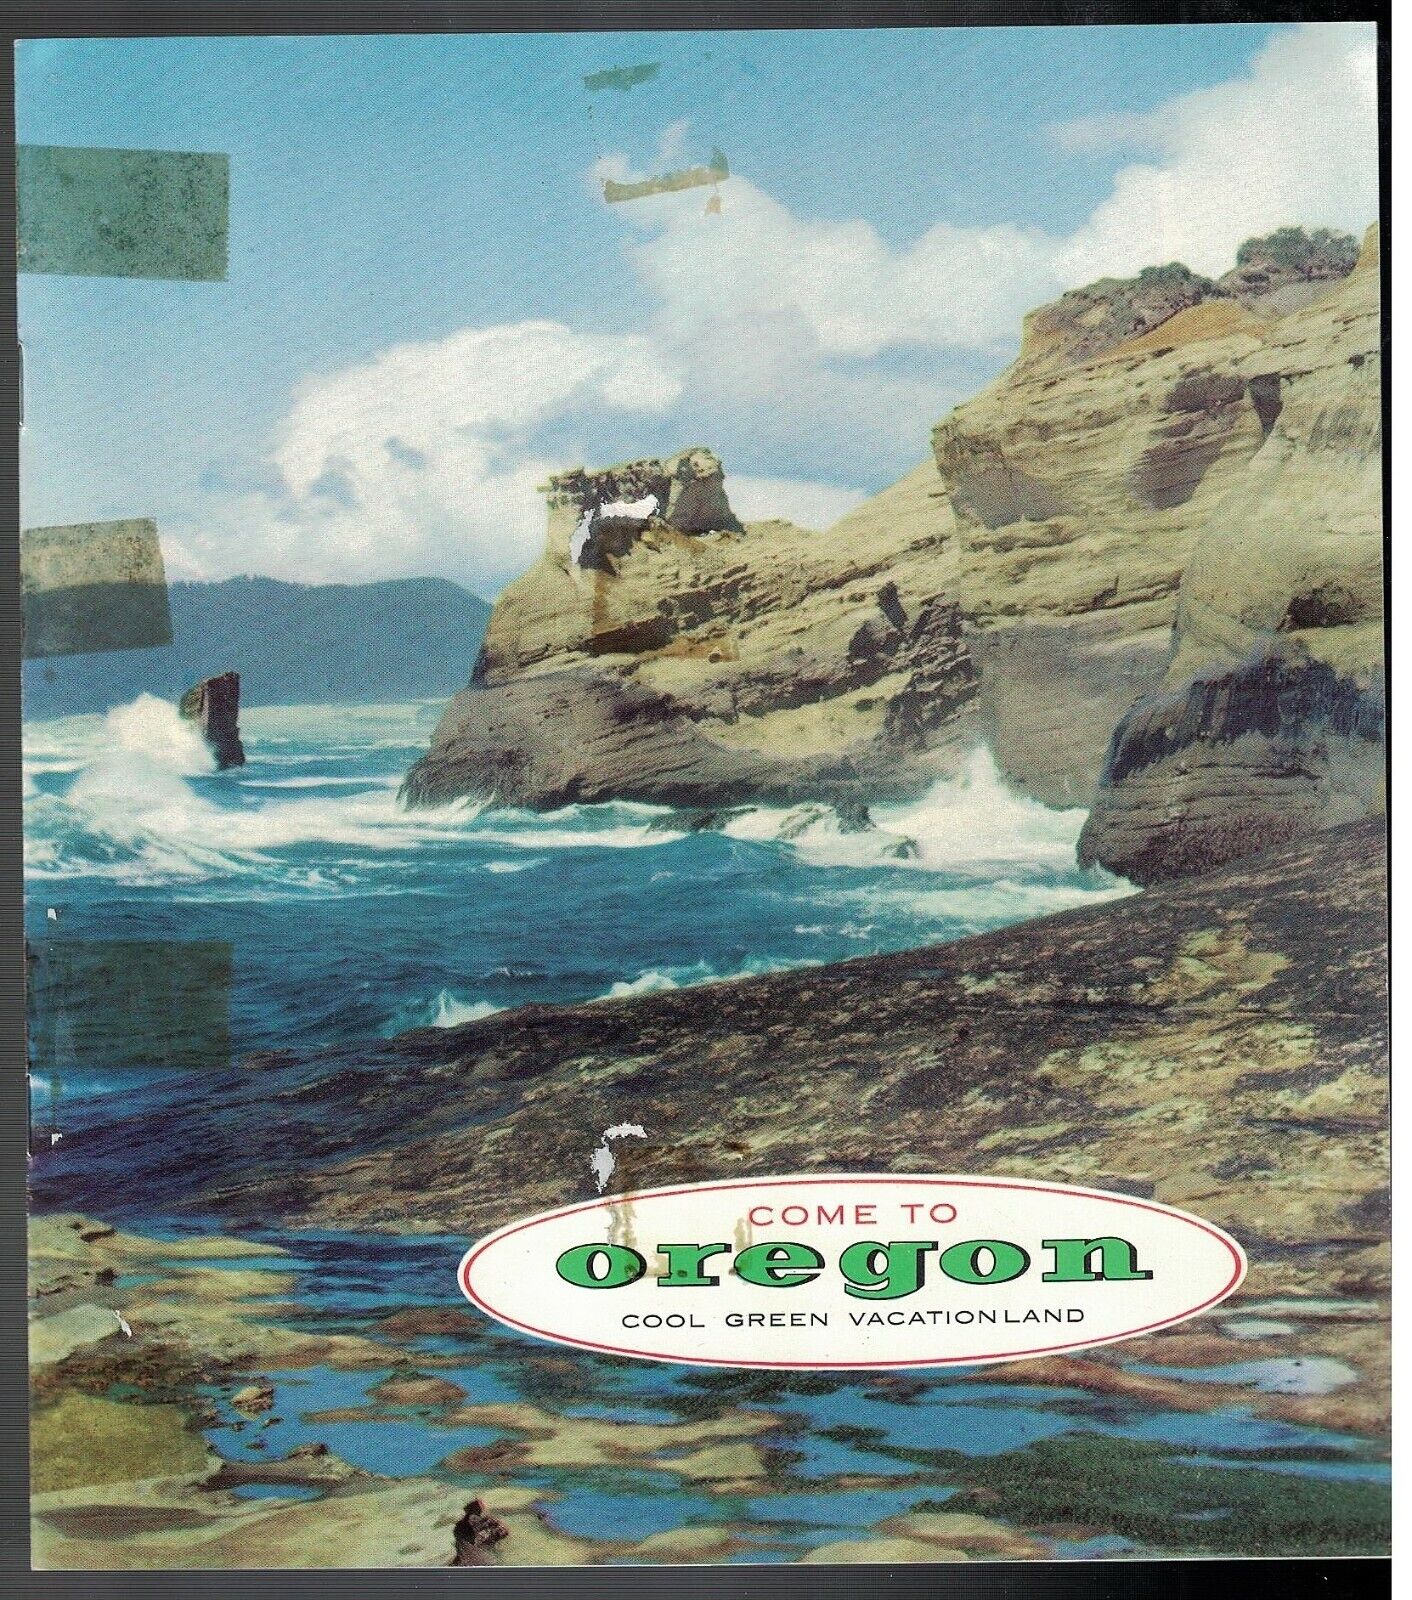 VINTAGE 1957-1959 COME TO COOL GREEN VACATIONLAND OREGON BOOKLET BROCHURE